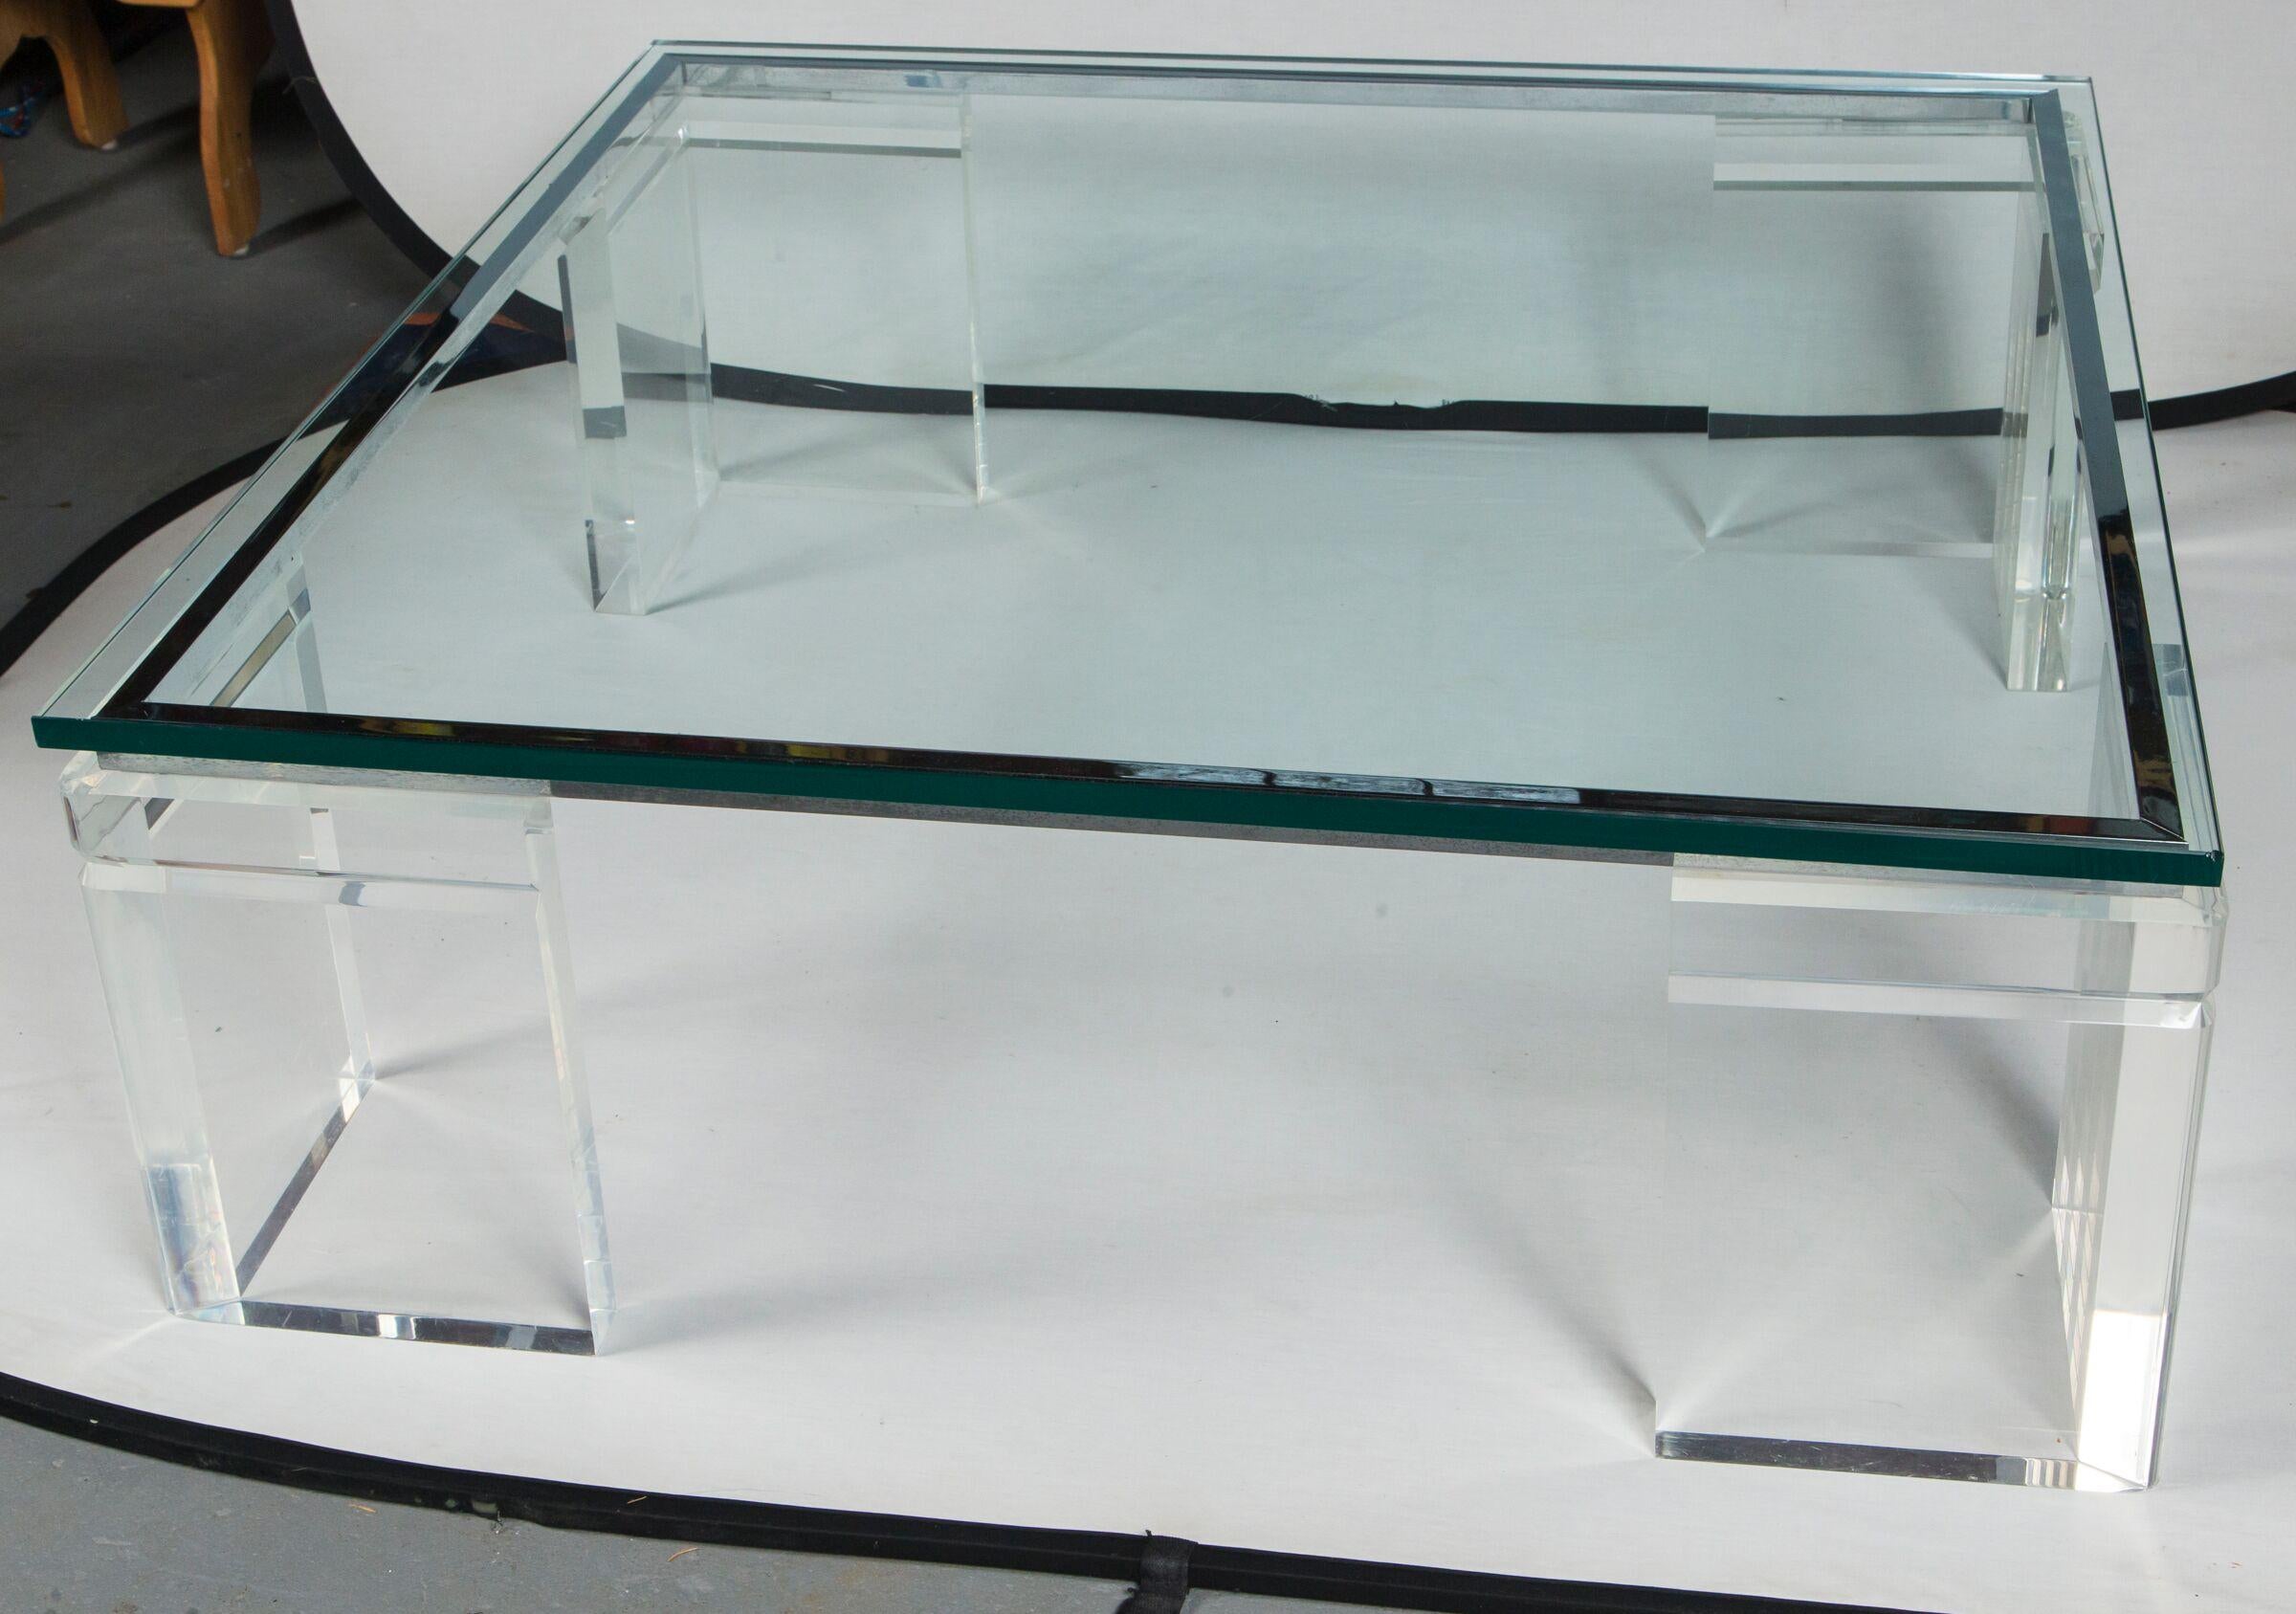 A monumental Charles Hollis Jones Lucite, chrome, and glass coffee table. The glass sits atop four very thick Lucite legs which are connected by 4 pieces of mitered chrome hardware. The top is thick glass with a flat polished edge and sits above the